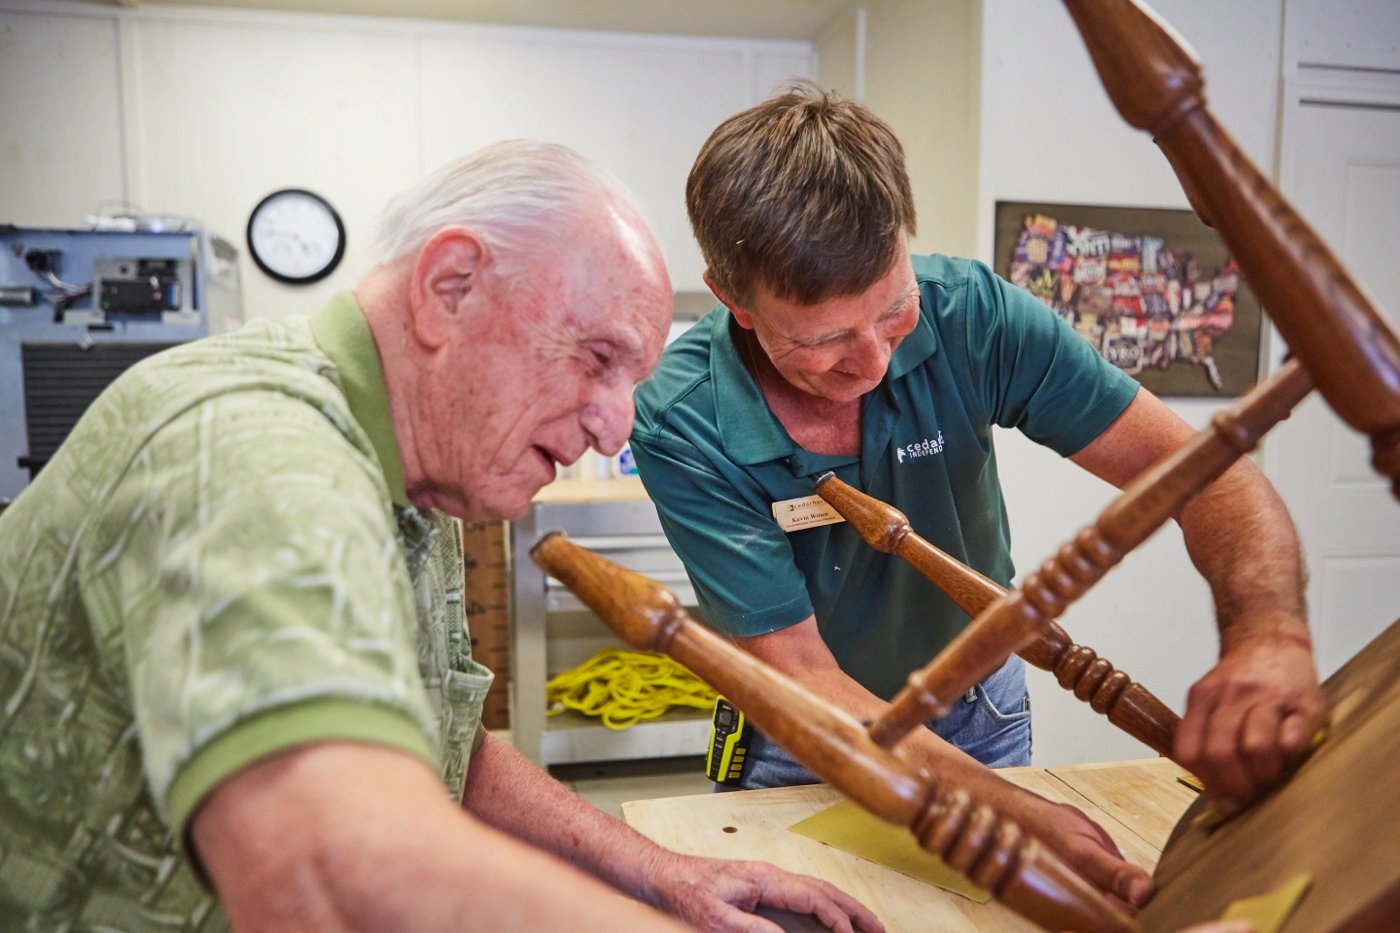 Senior doing woodworking class with team member